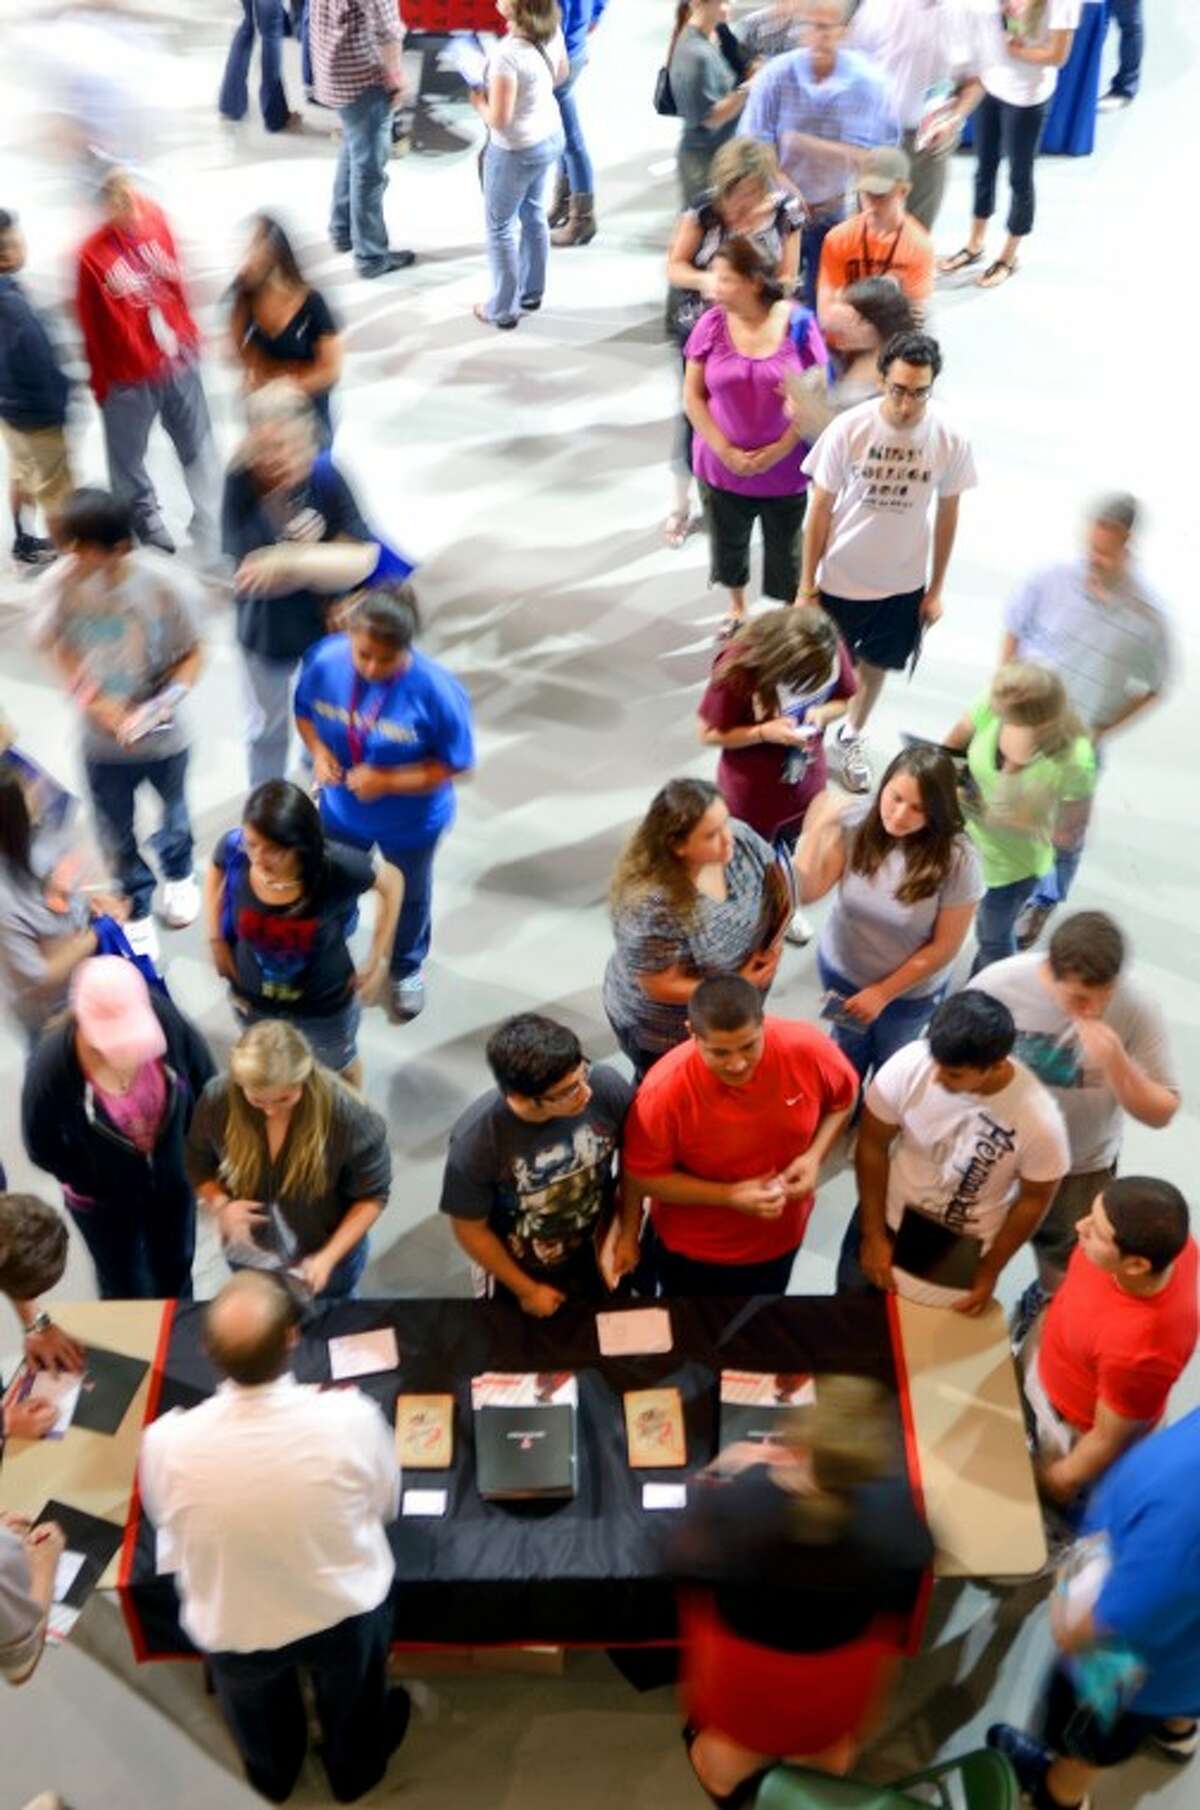 The Texas Tech table draws a large crowd during the College Forum Thursday at the Chaparrel Center. The free event gave students and families the opportunity to meet representatives from various area colleges. James Durbin/Reporter-Telegram